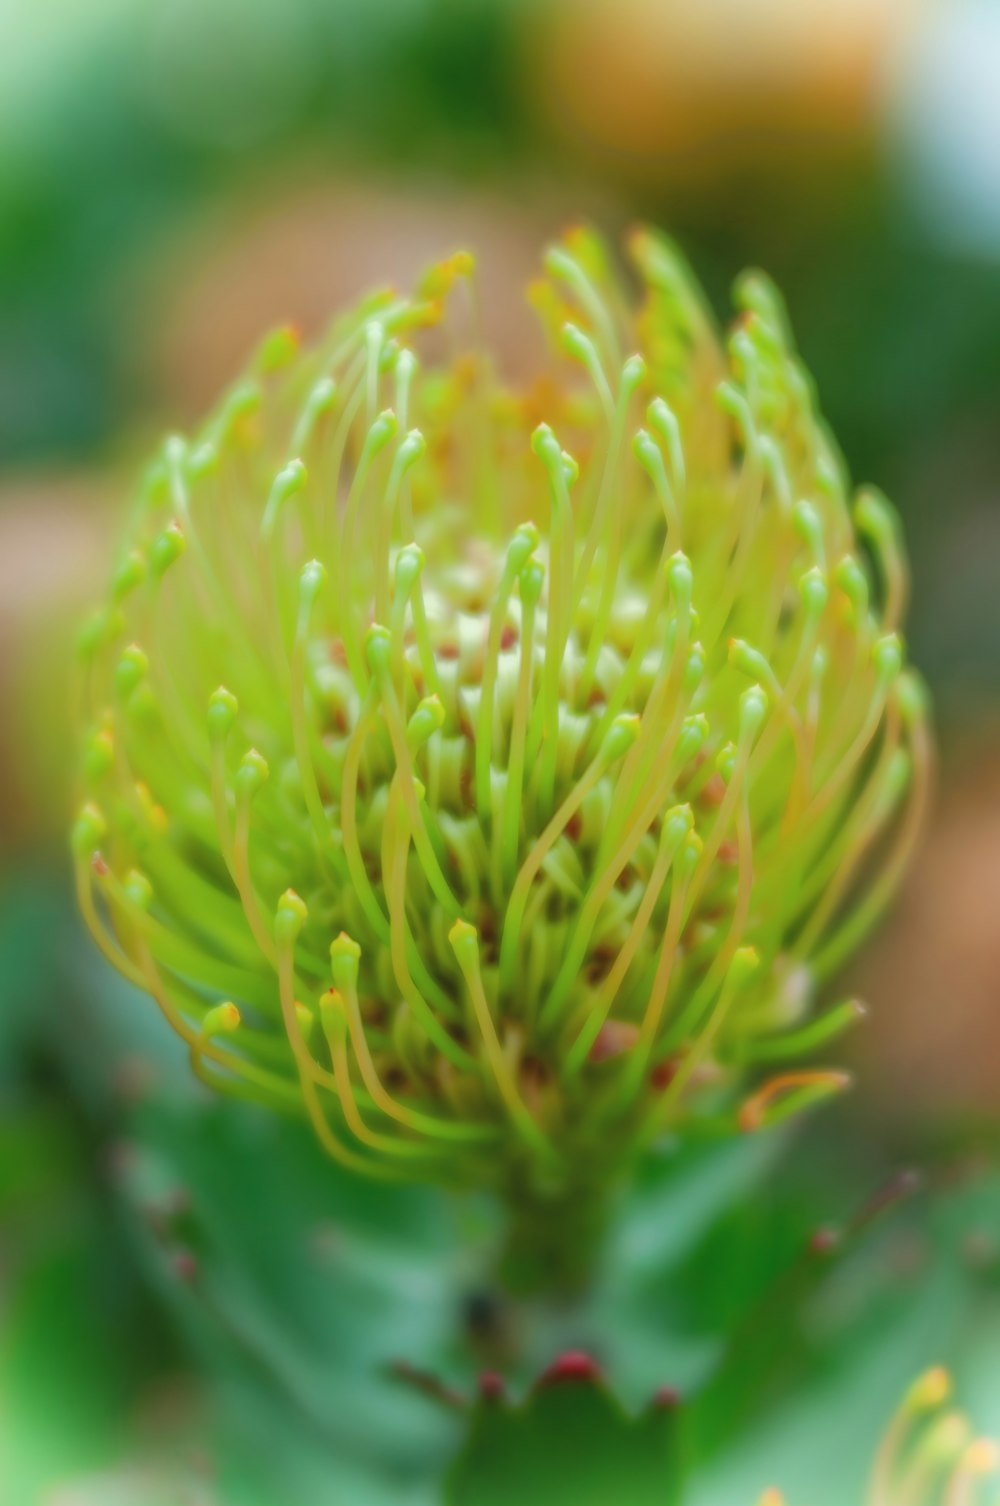 a close up of a green flower on a blurry background